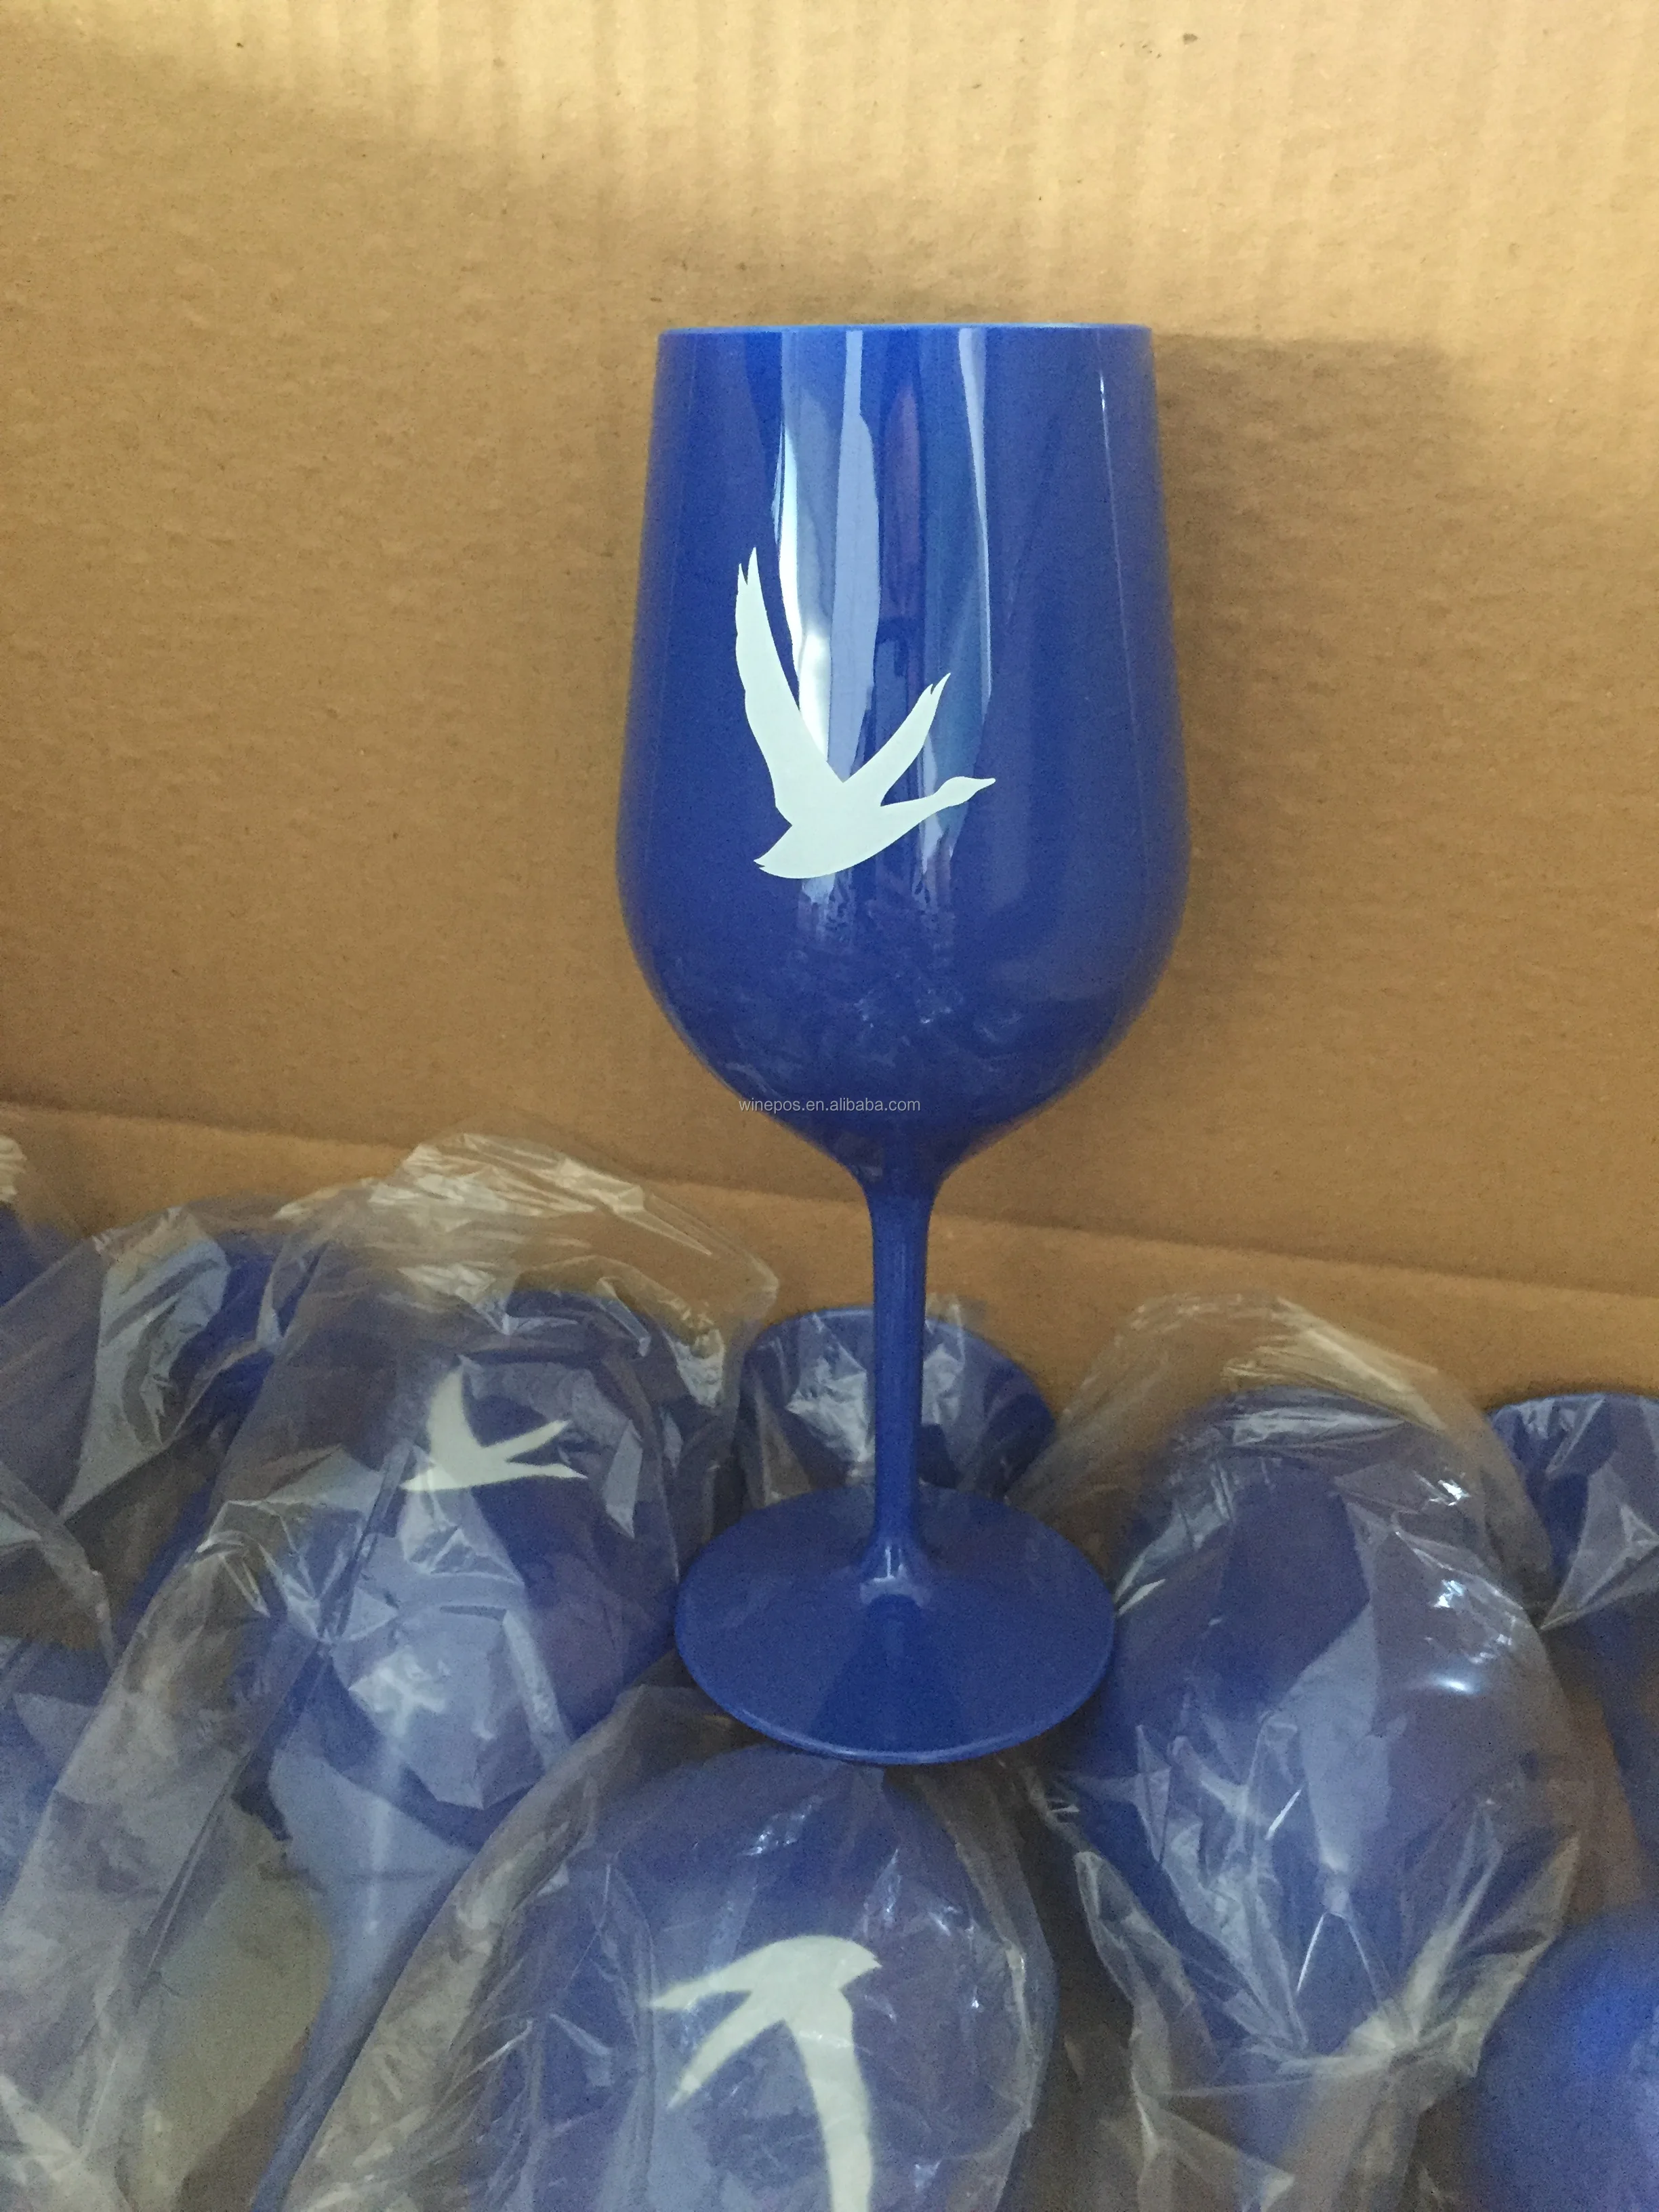 GREY GOOSE LOT OF 4 GREY GOOSE CUP WHITE CHAMPAGNE WINE SET PLASTIC 